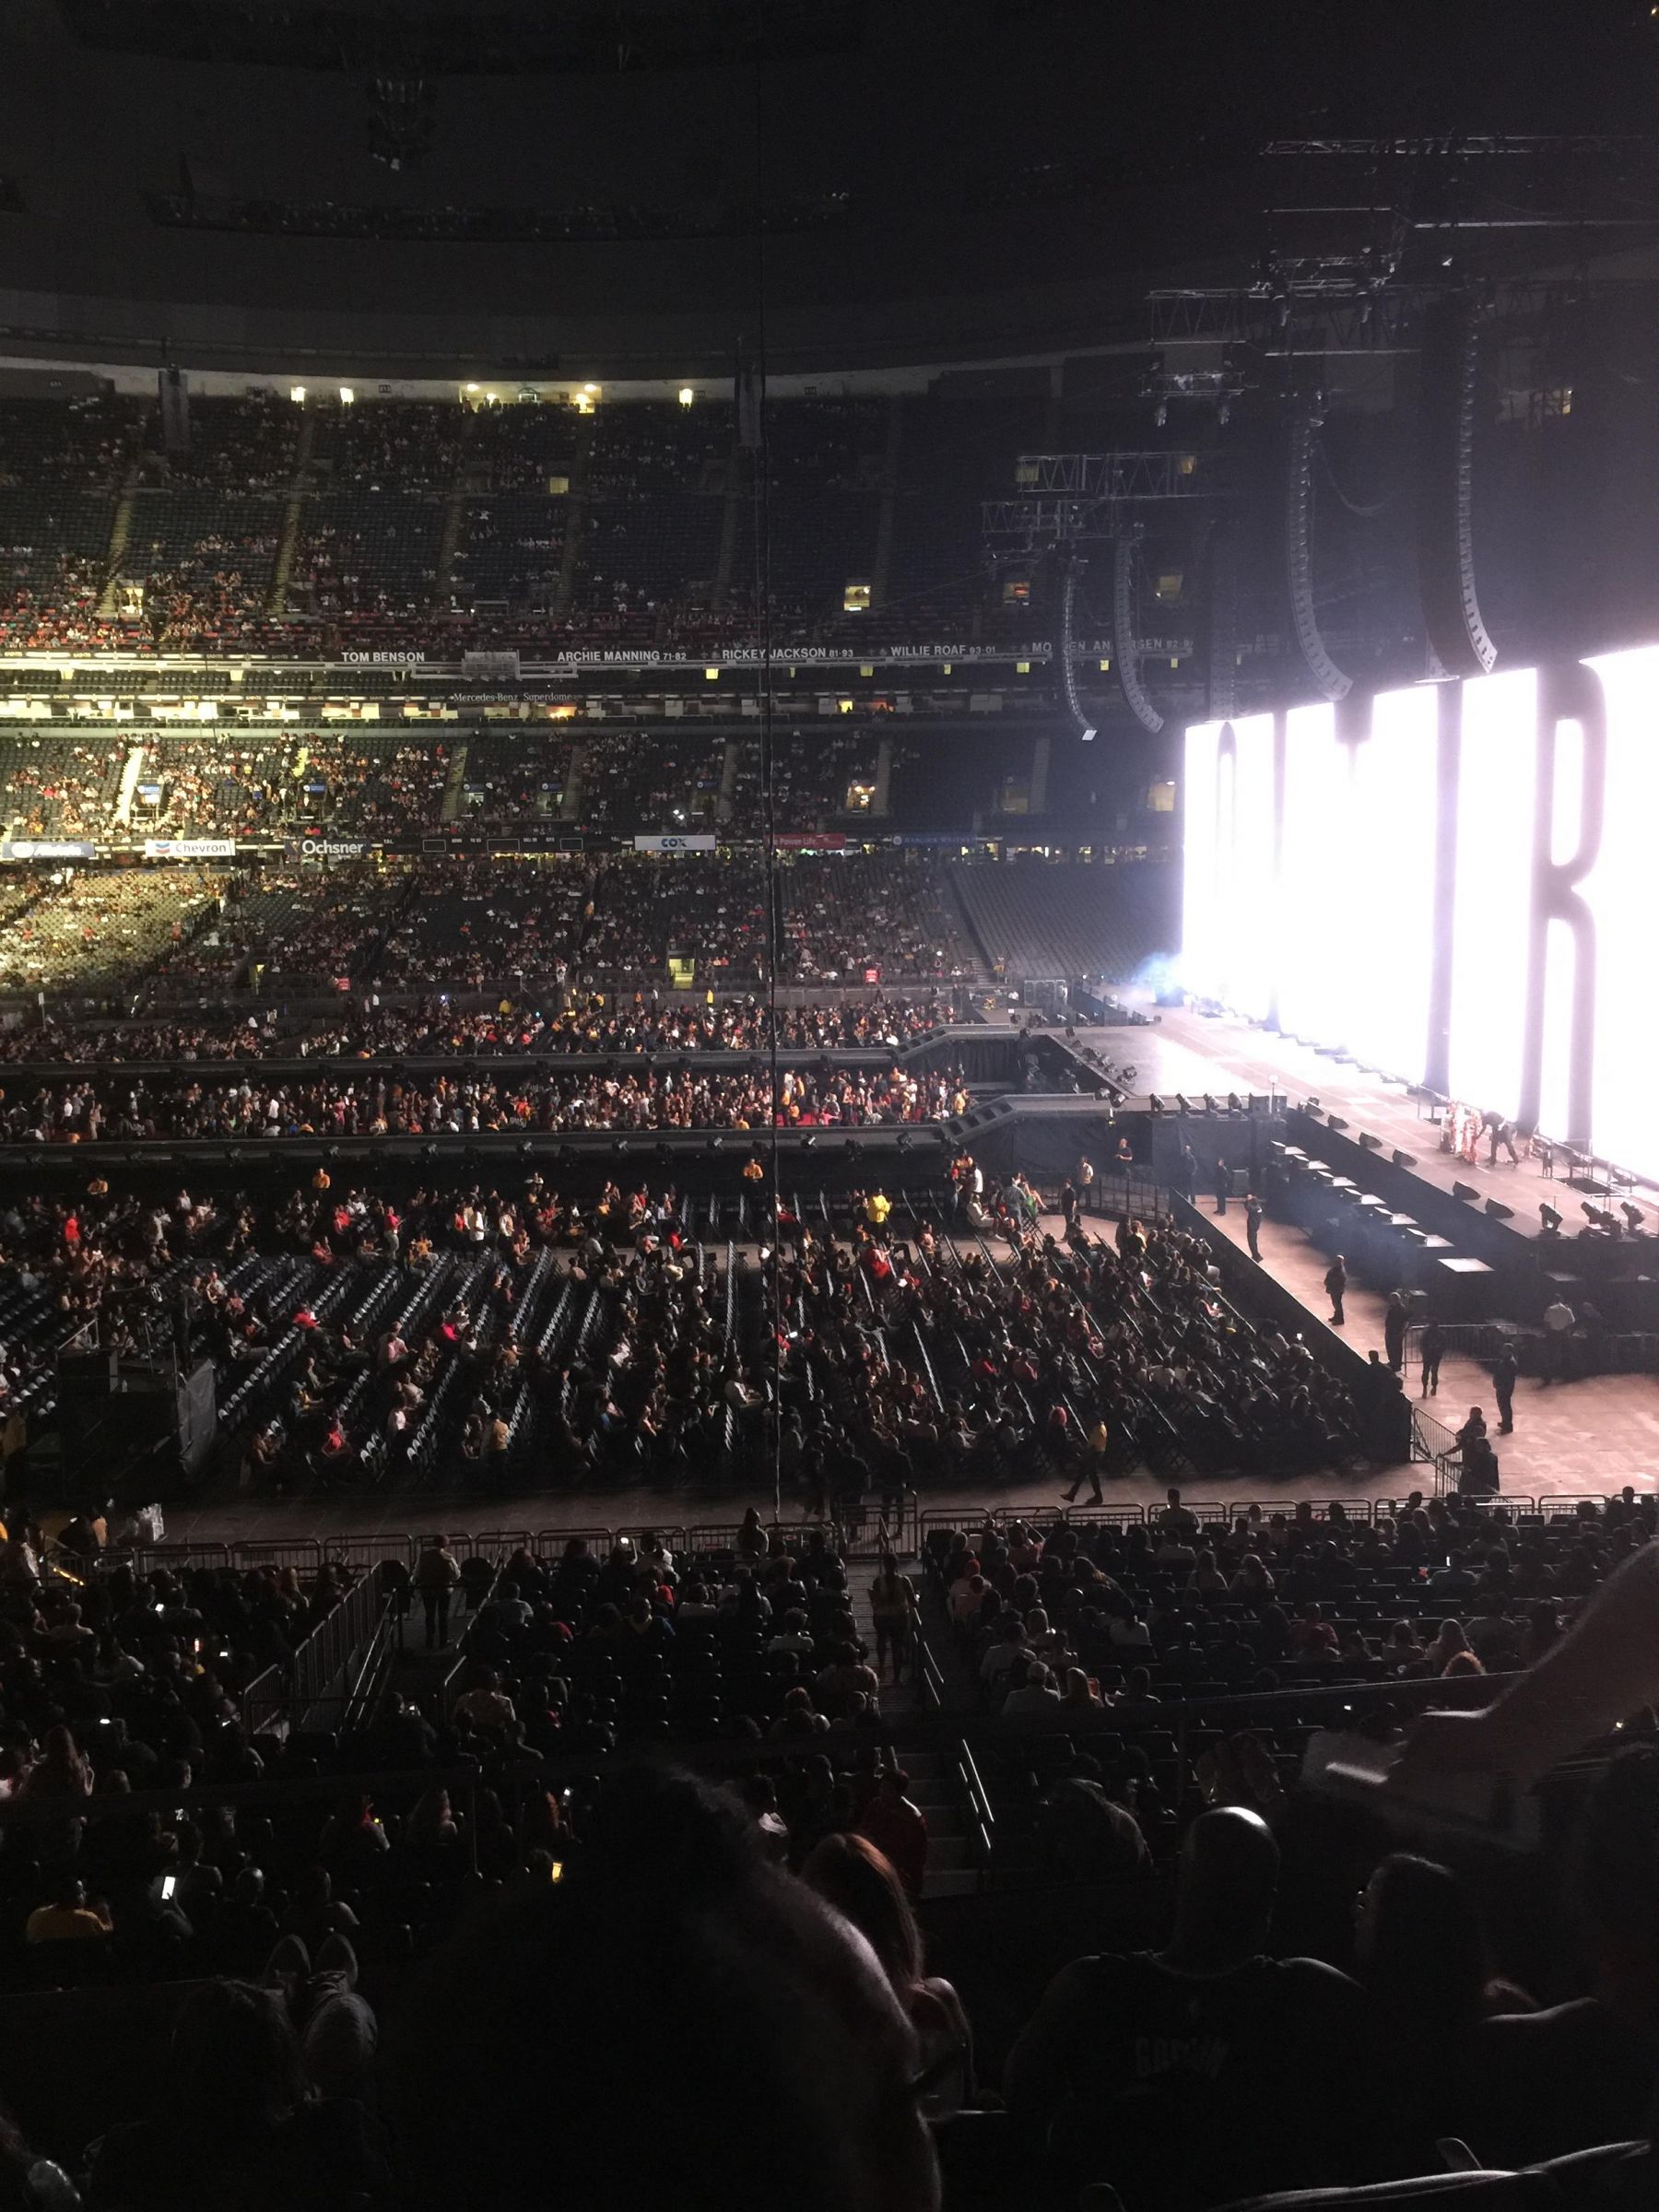 Superdome Seating Chart Rolling Stones